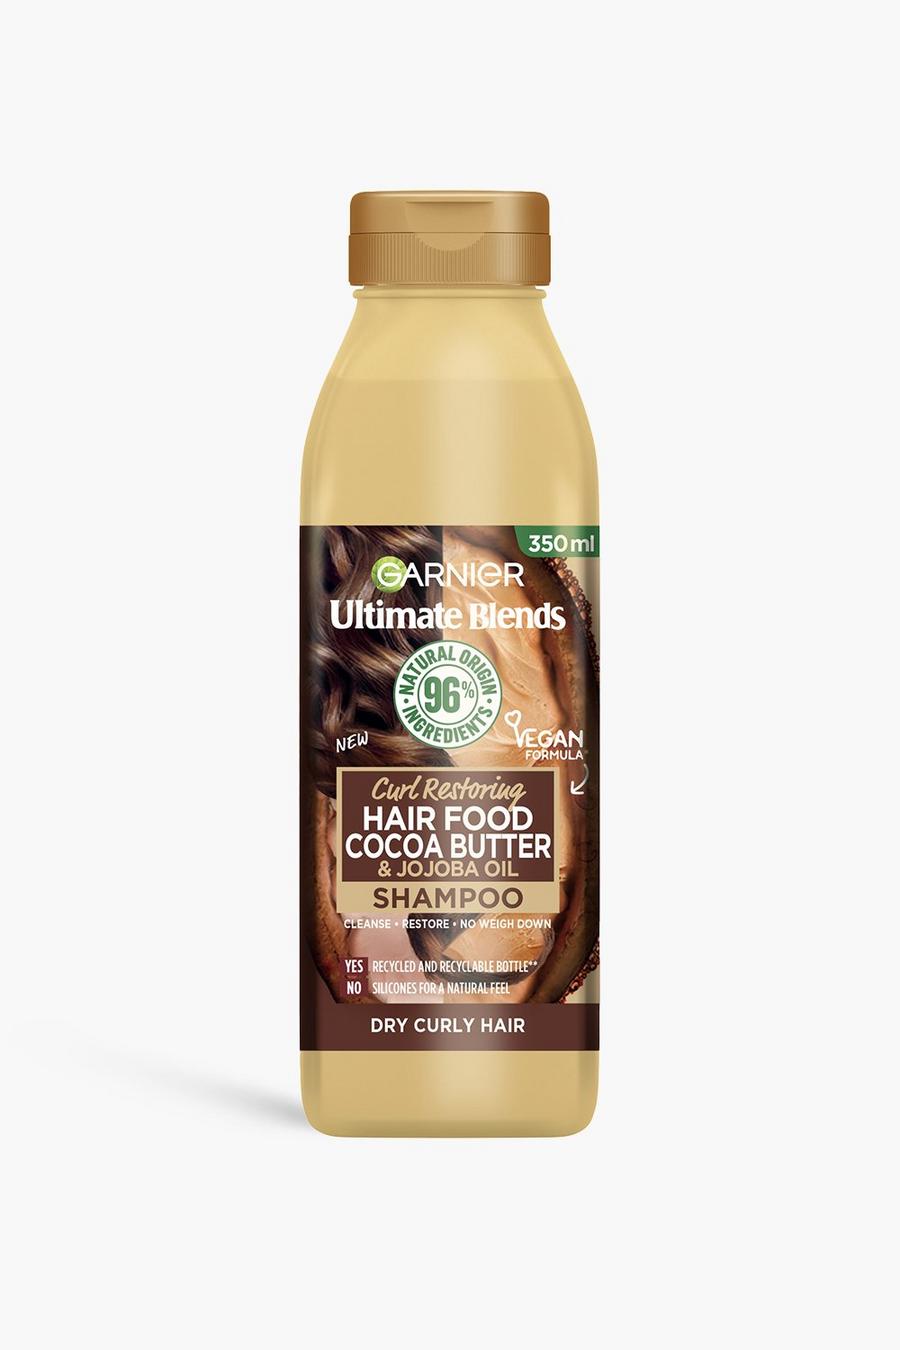 White blanc Garnier Ultimate Blends Cocoa Butter Shampoo for Dry, Curly Hair 